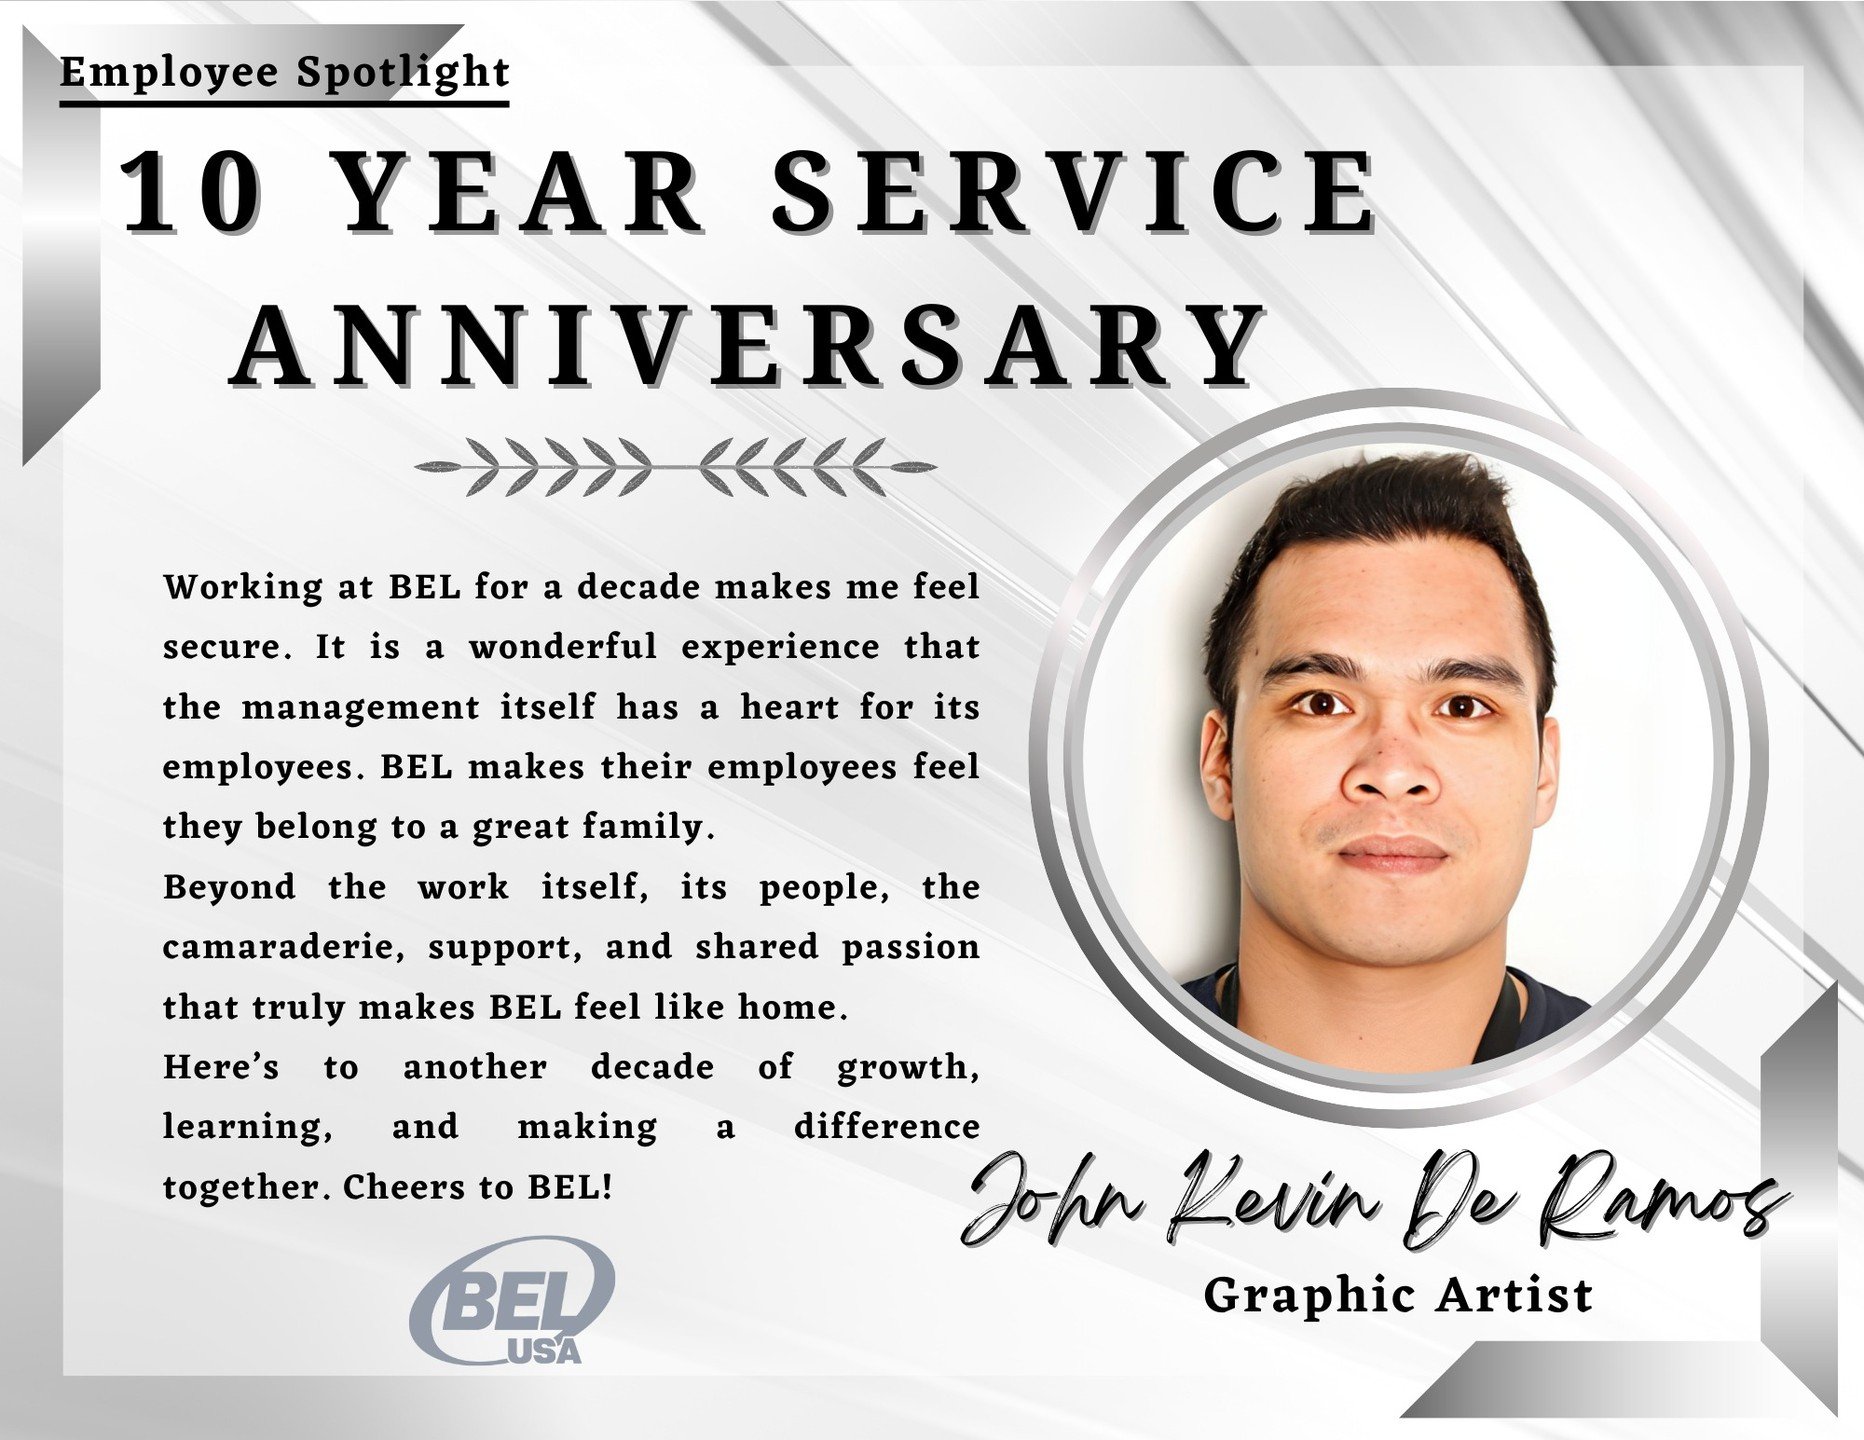 Today, we're celebrating a decade of dedication and excellence!

Our incredible team member John Kevin De Ramos, has completed 10 amazing years with us, and we couldn't be more proud and grateful for his hard work, passion, and commitment.

Here's to